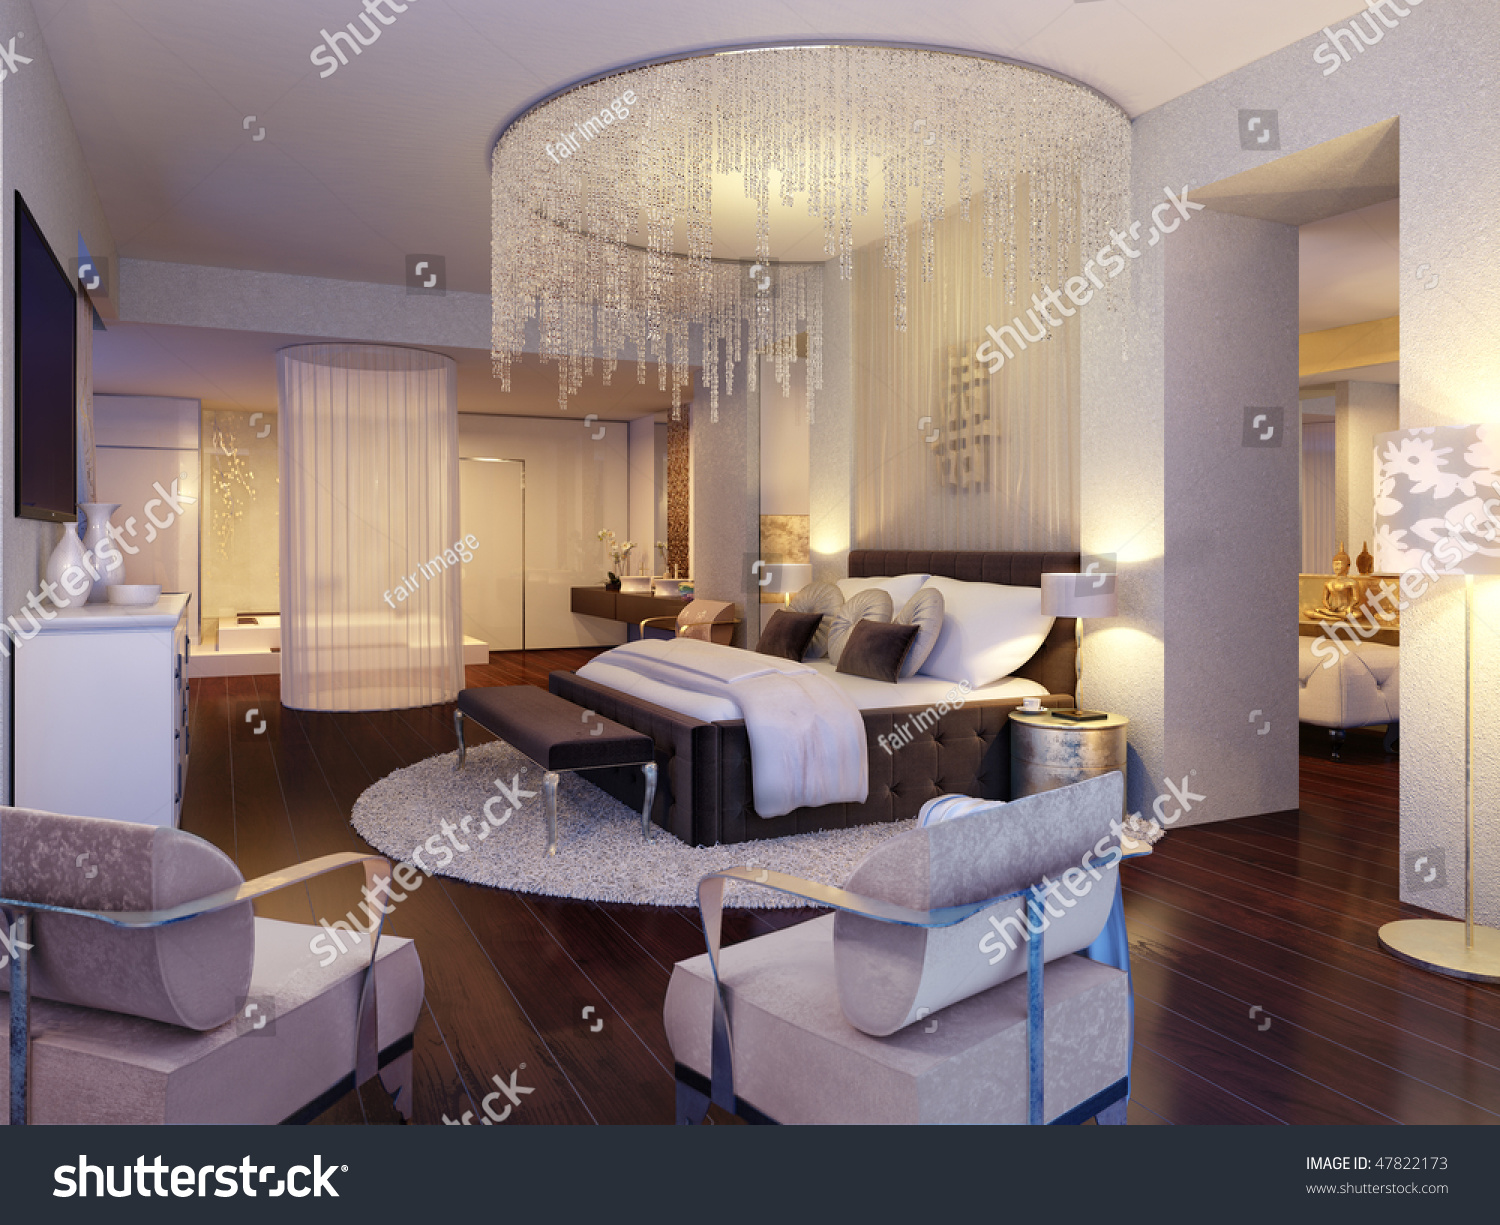 Hotel Room. Design A Room In The Hotel Stock Photo 47822173 : Shutterstock